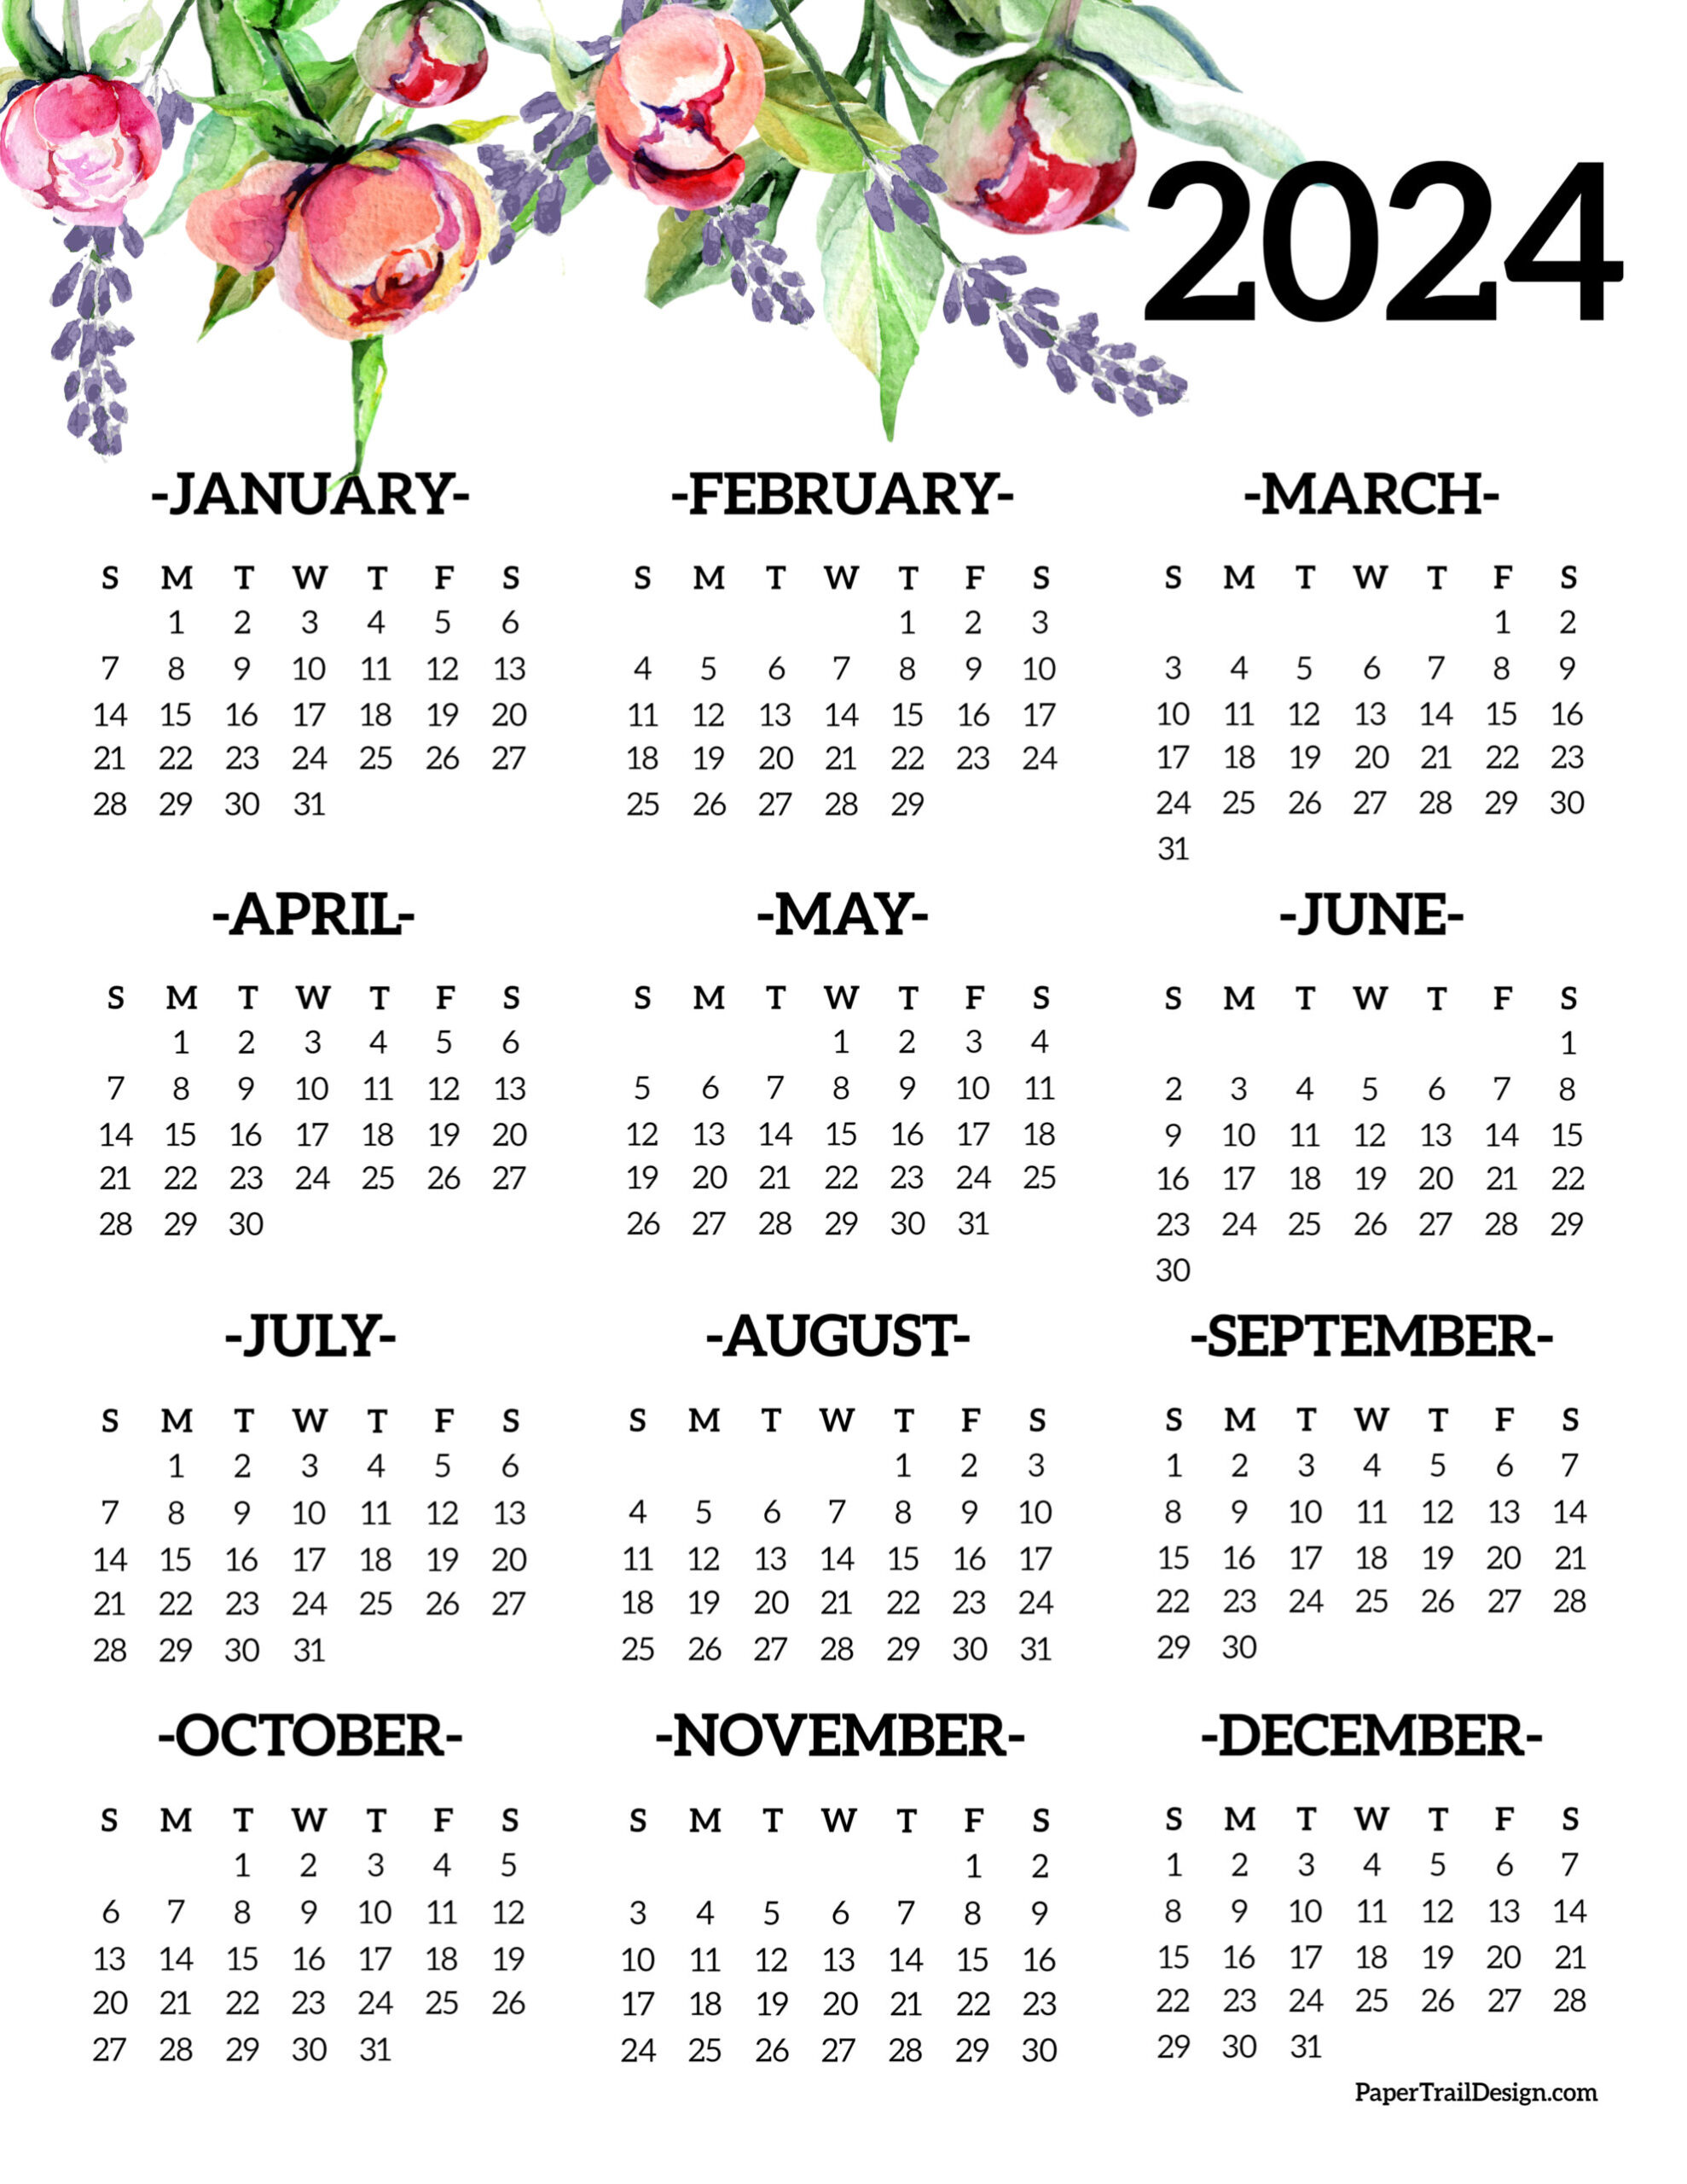 Calendar 2024 Printable One Page - Paper Trail Design for 2024 Calendar Printable Free One Page